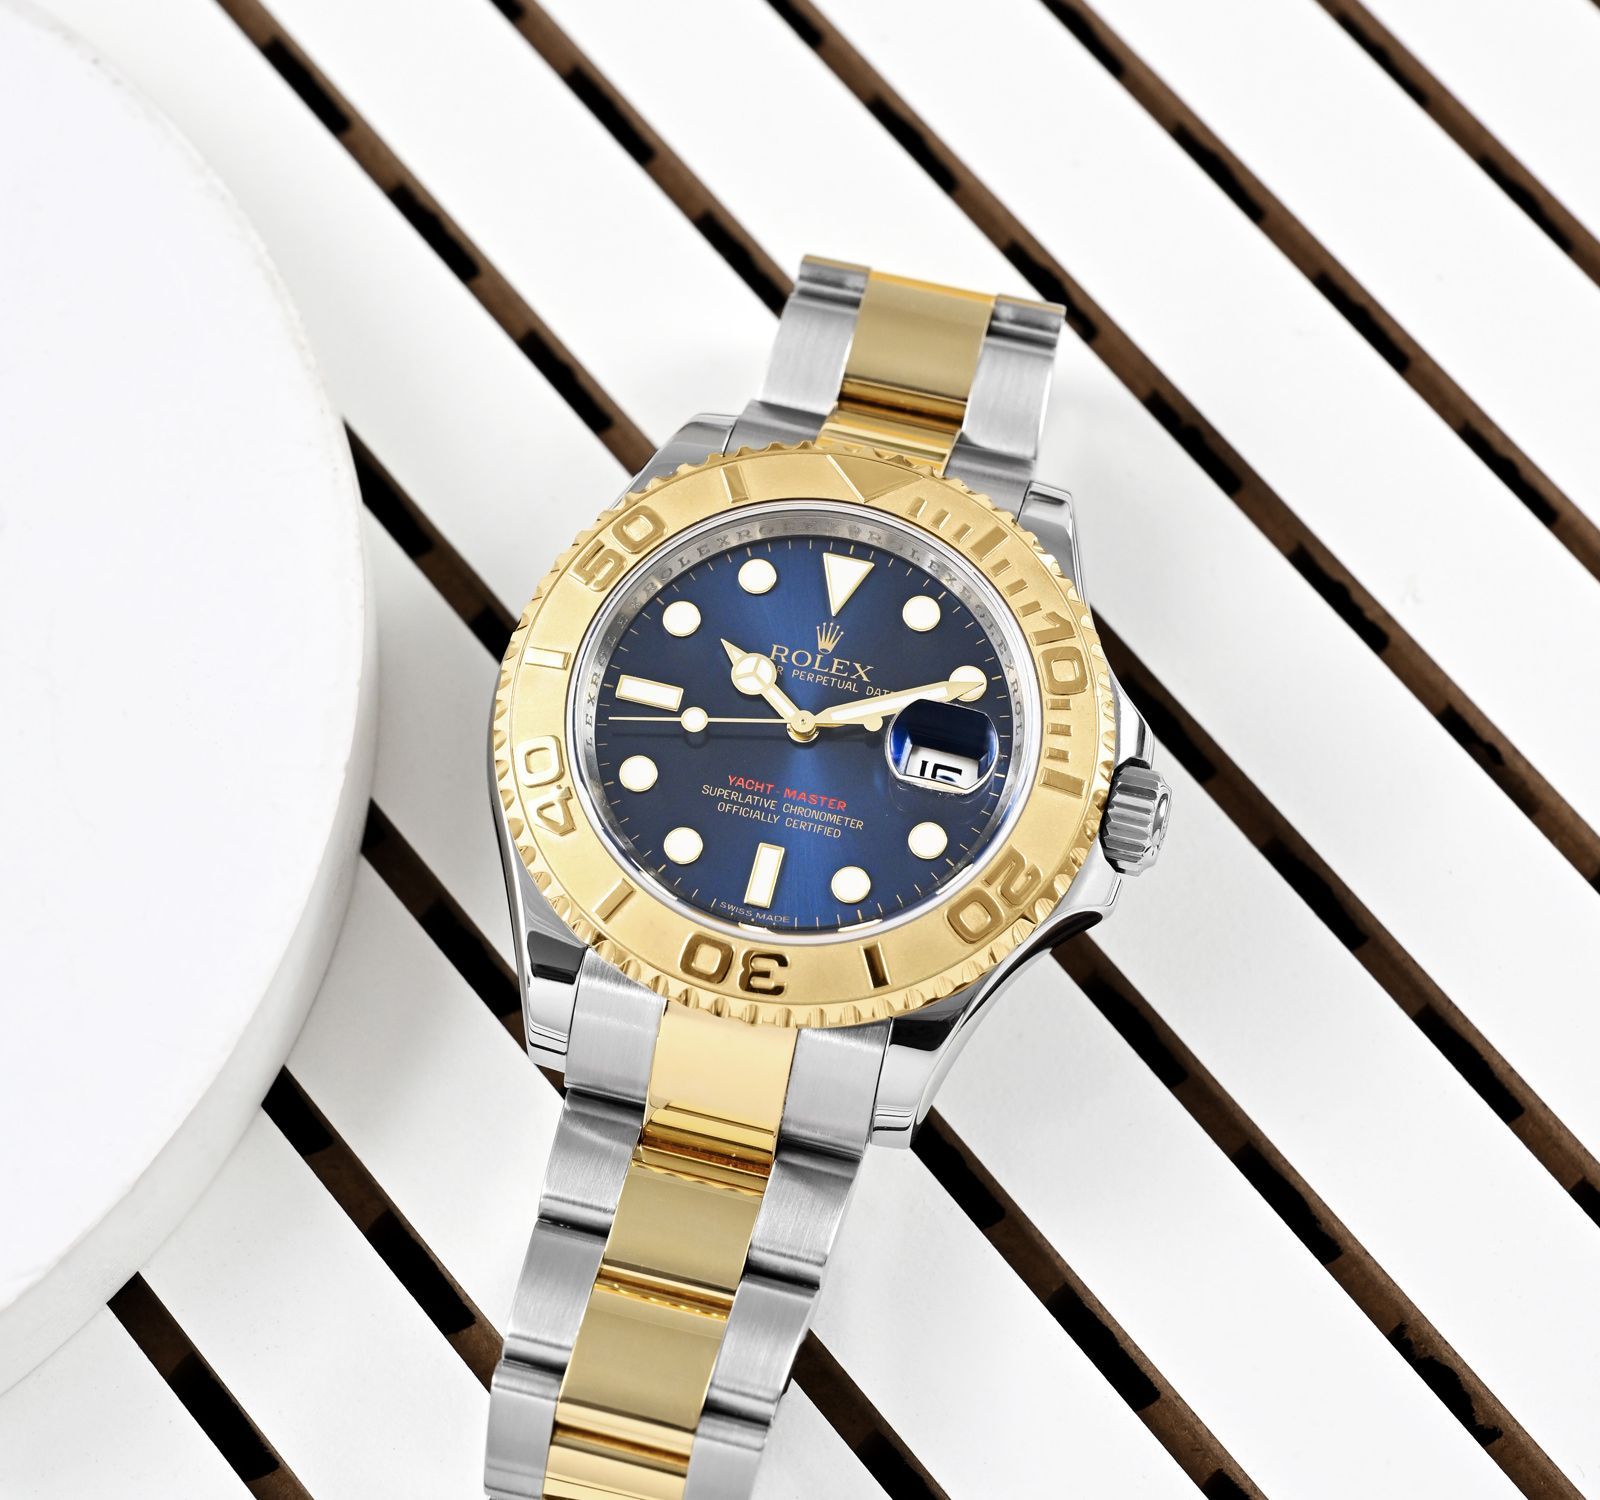 40mm Rolex Two-Tone Yachtmaster Blue Dial 16623 - YACHTMASTER - ROLEX